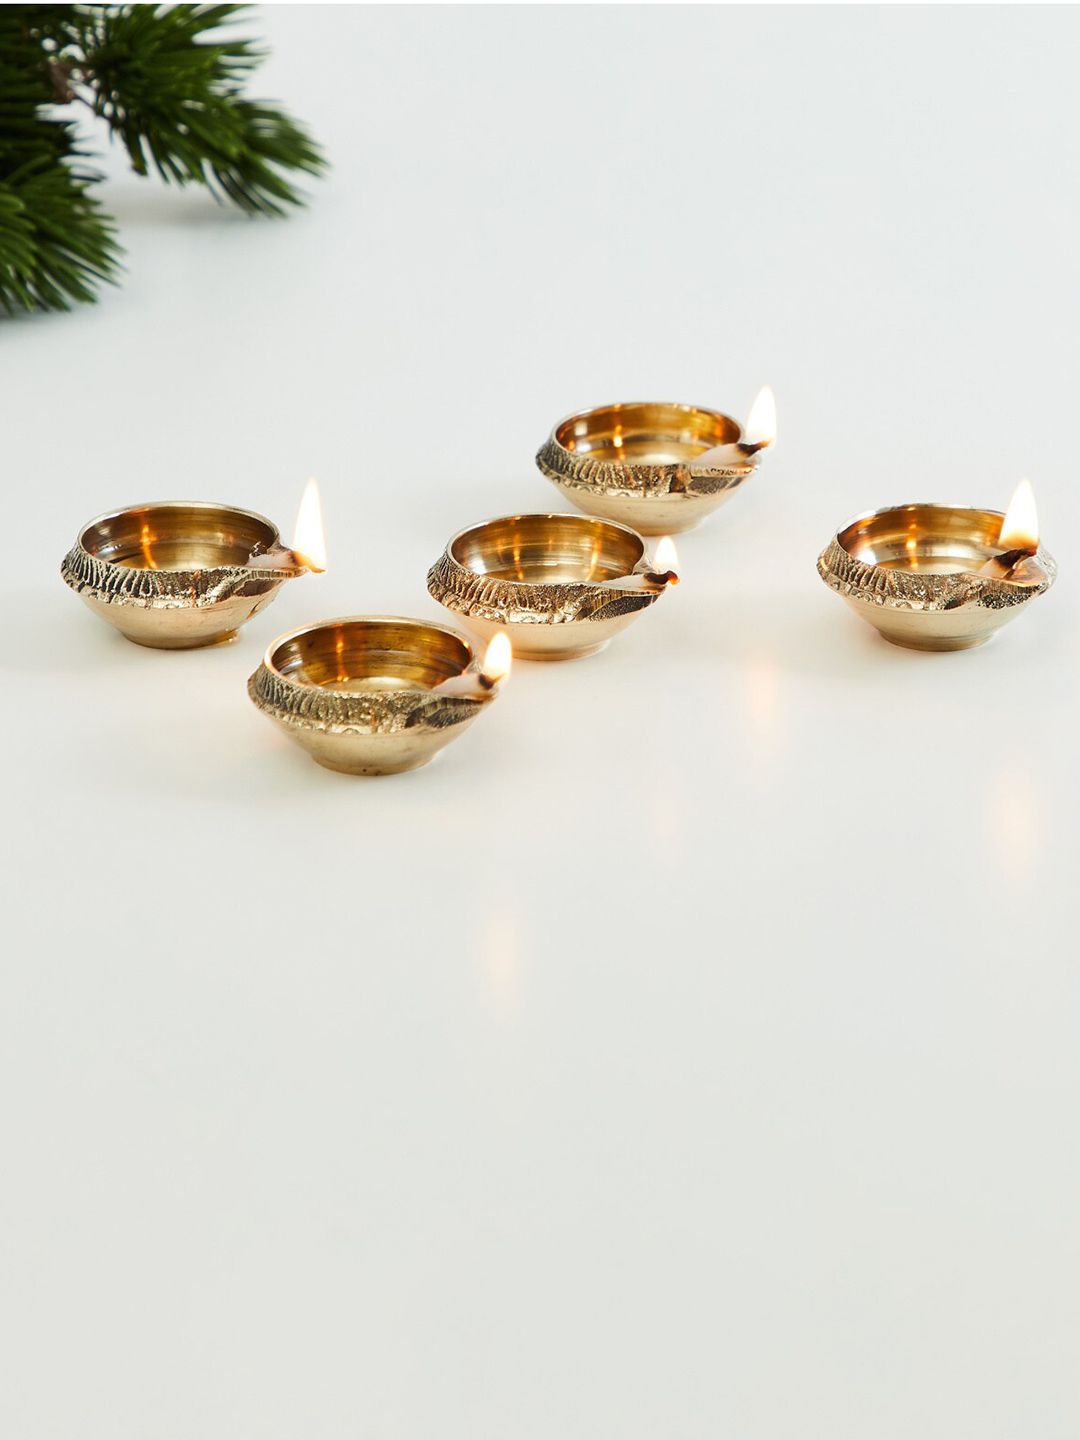 Home Centre Set of 5 Gold-Toned Textured Metal Mini Diya Price in India